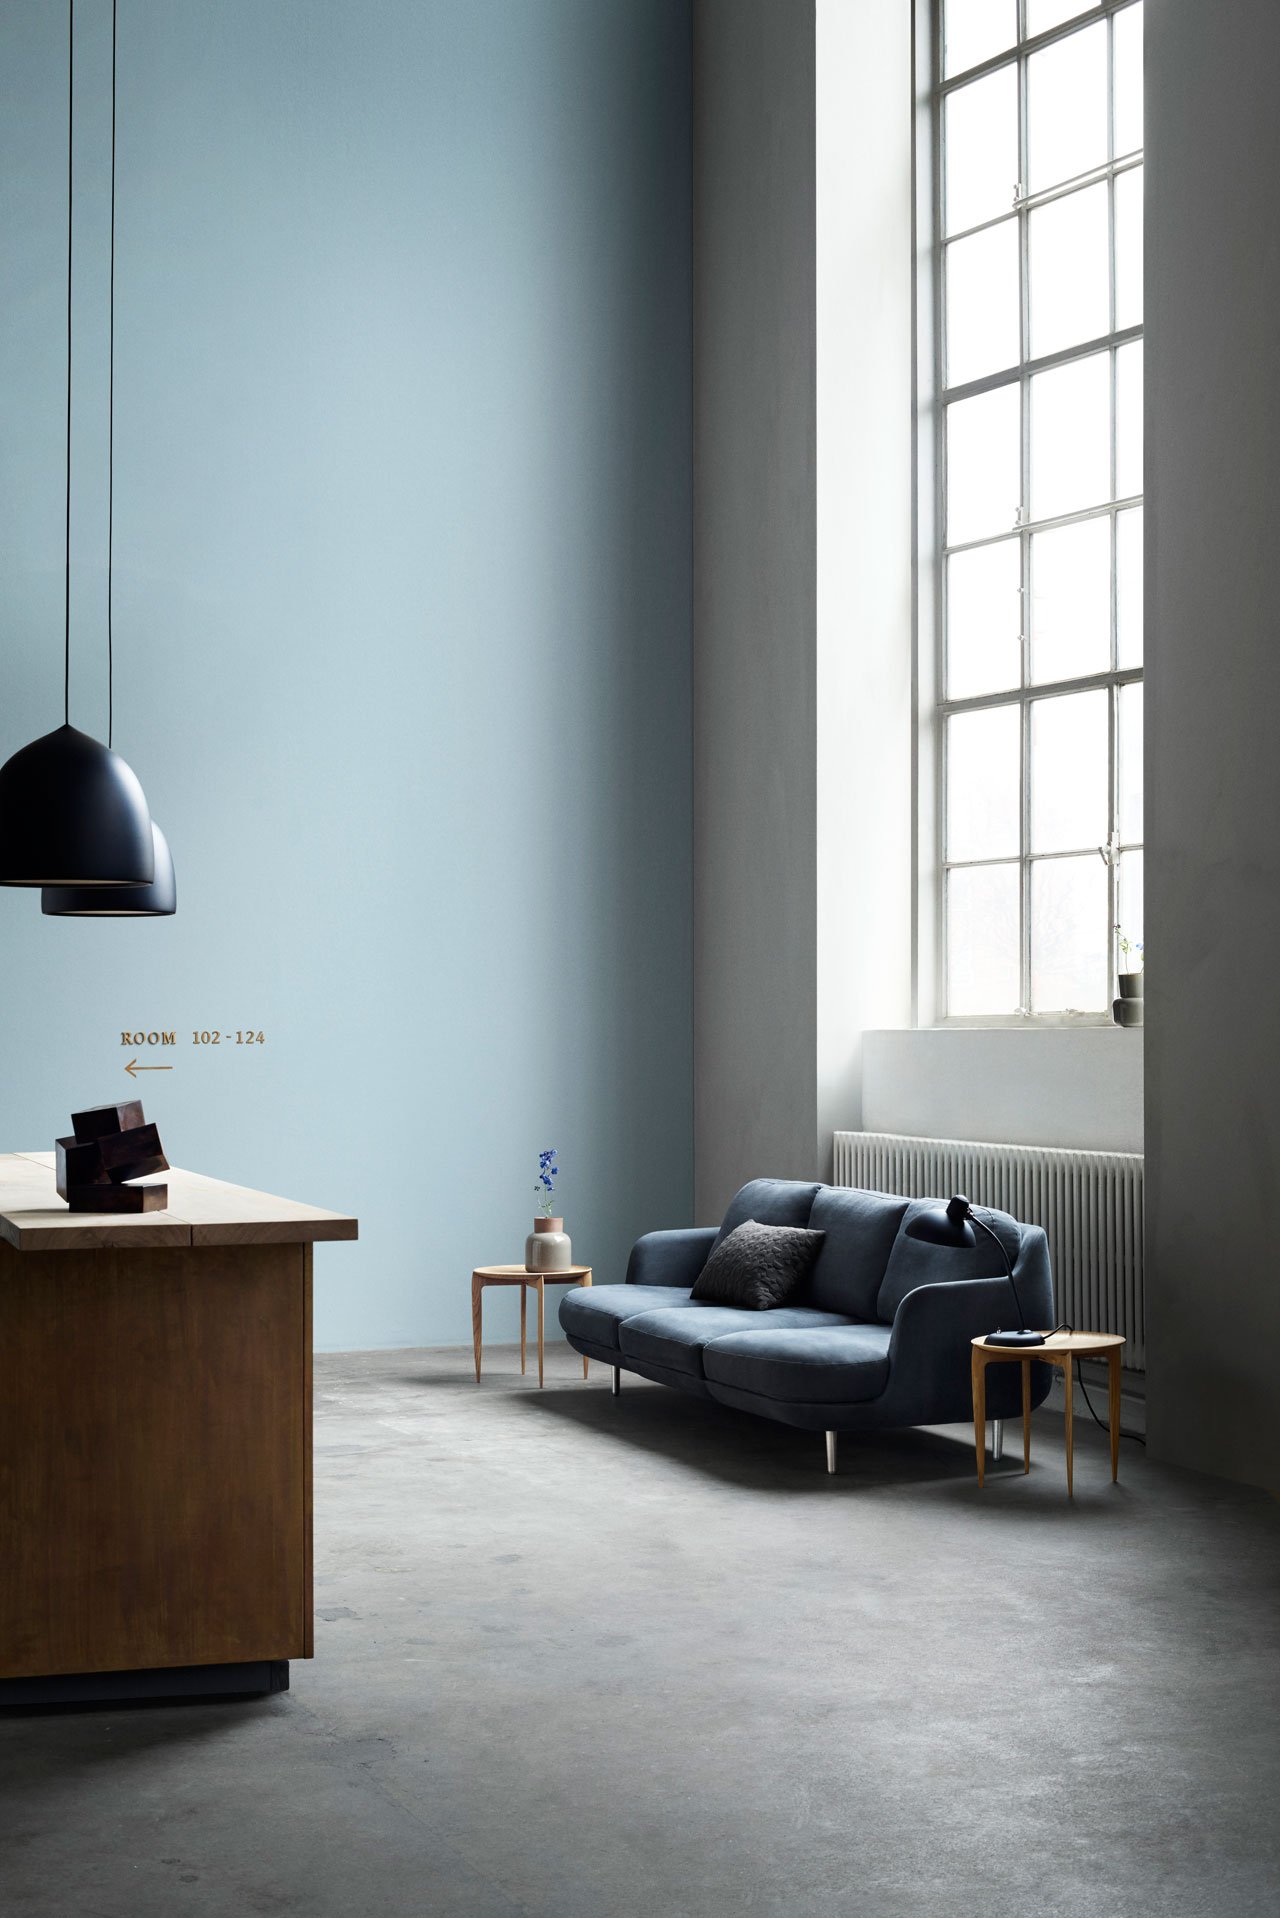 Lune sofa by Jaime Hayon for the Republic of Fritz Hansen.